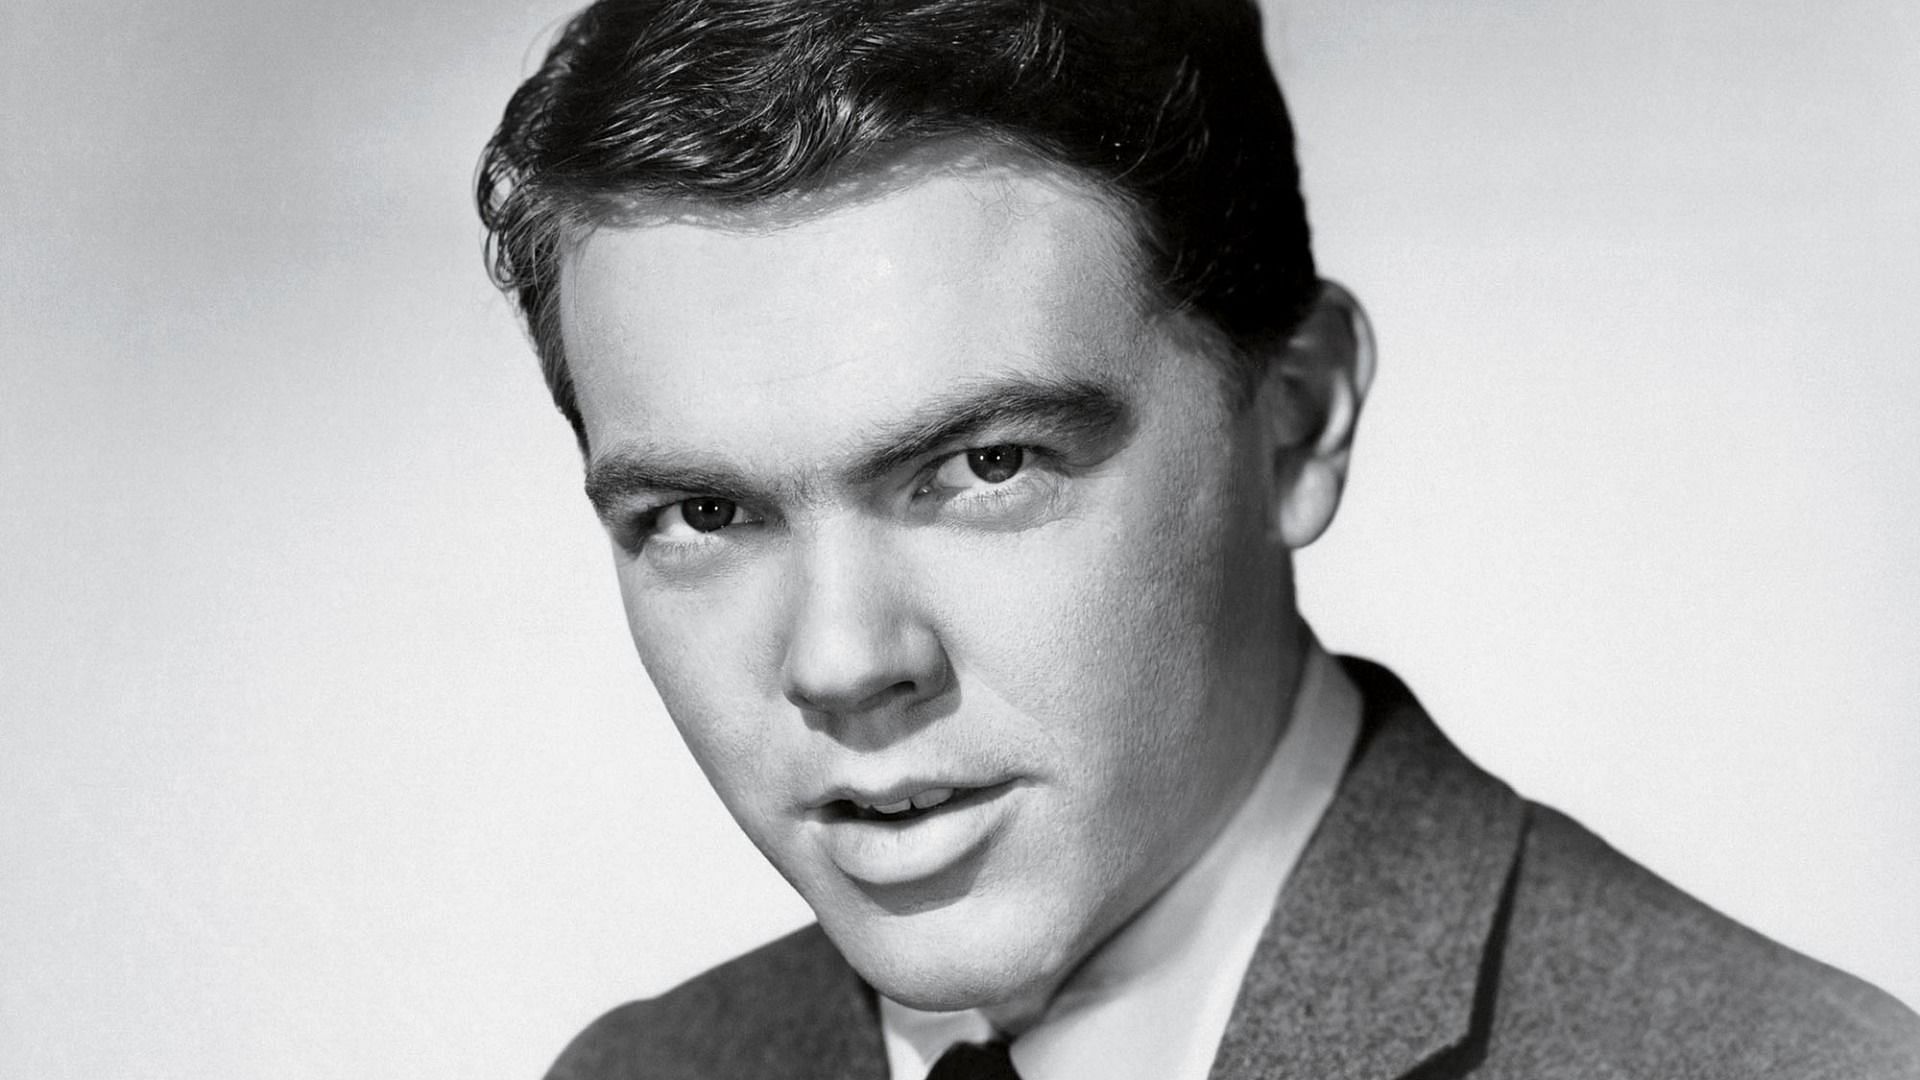 Bobby Driscoll passed away at the age of 31 in New York. (Image via Twitter/@ThePolishArtist)